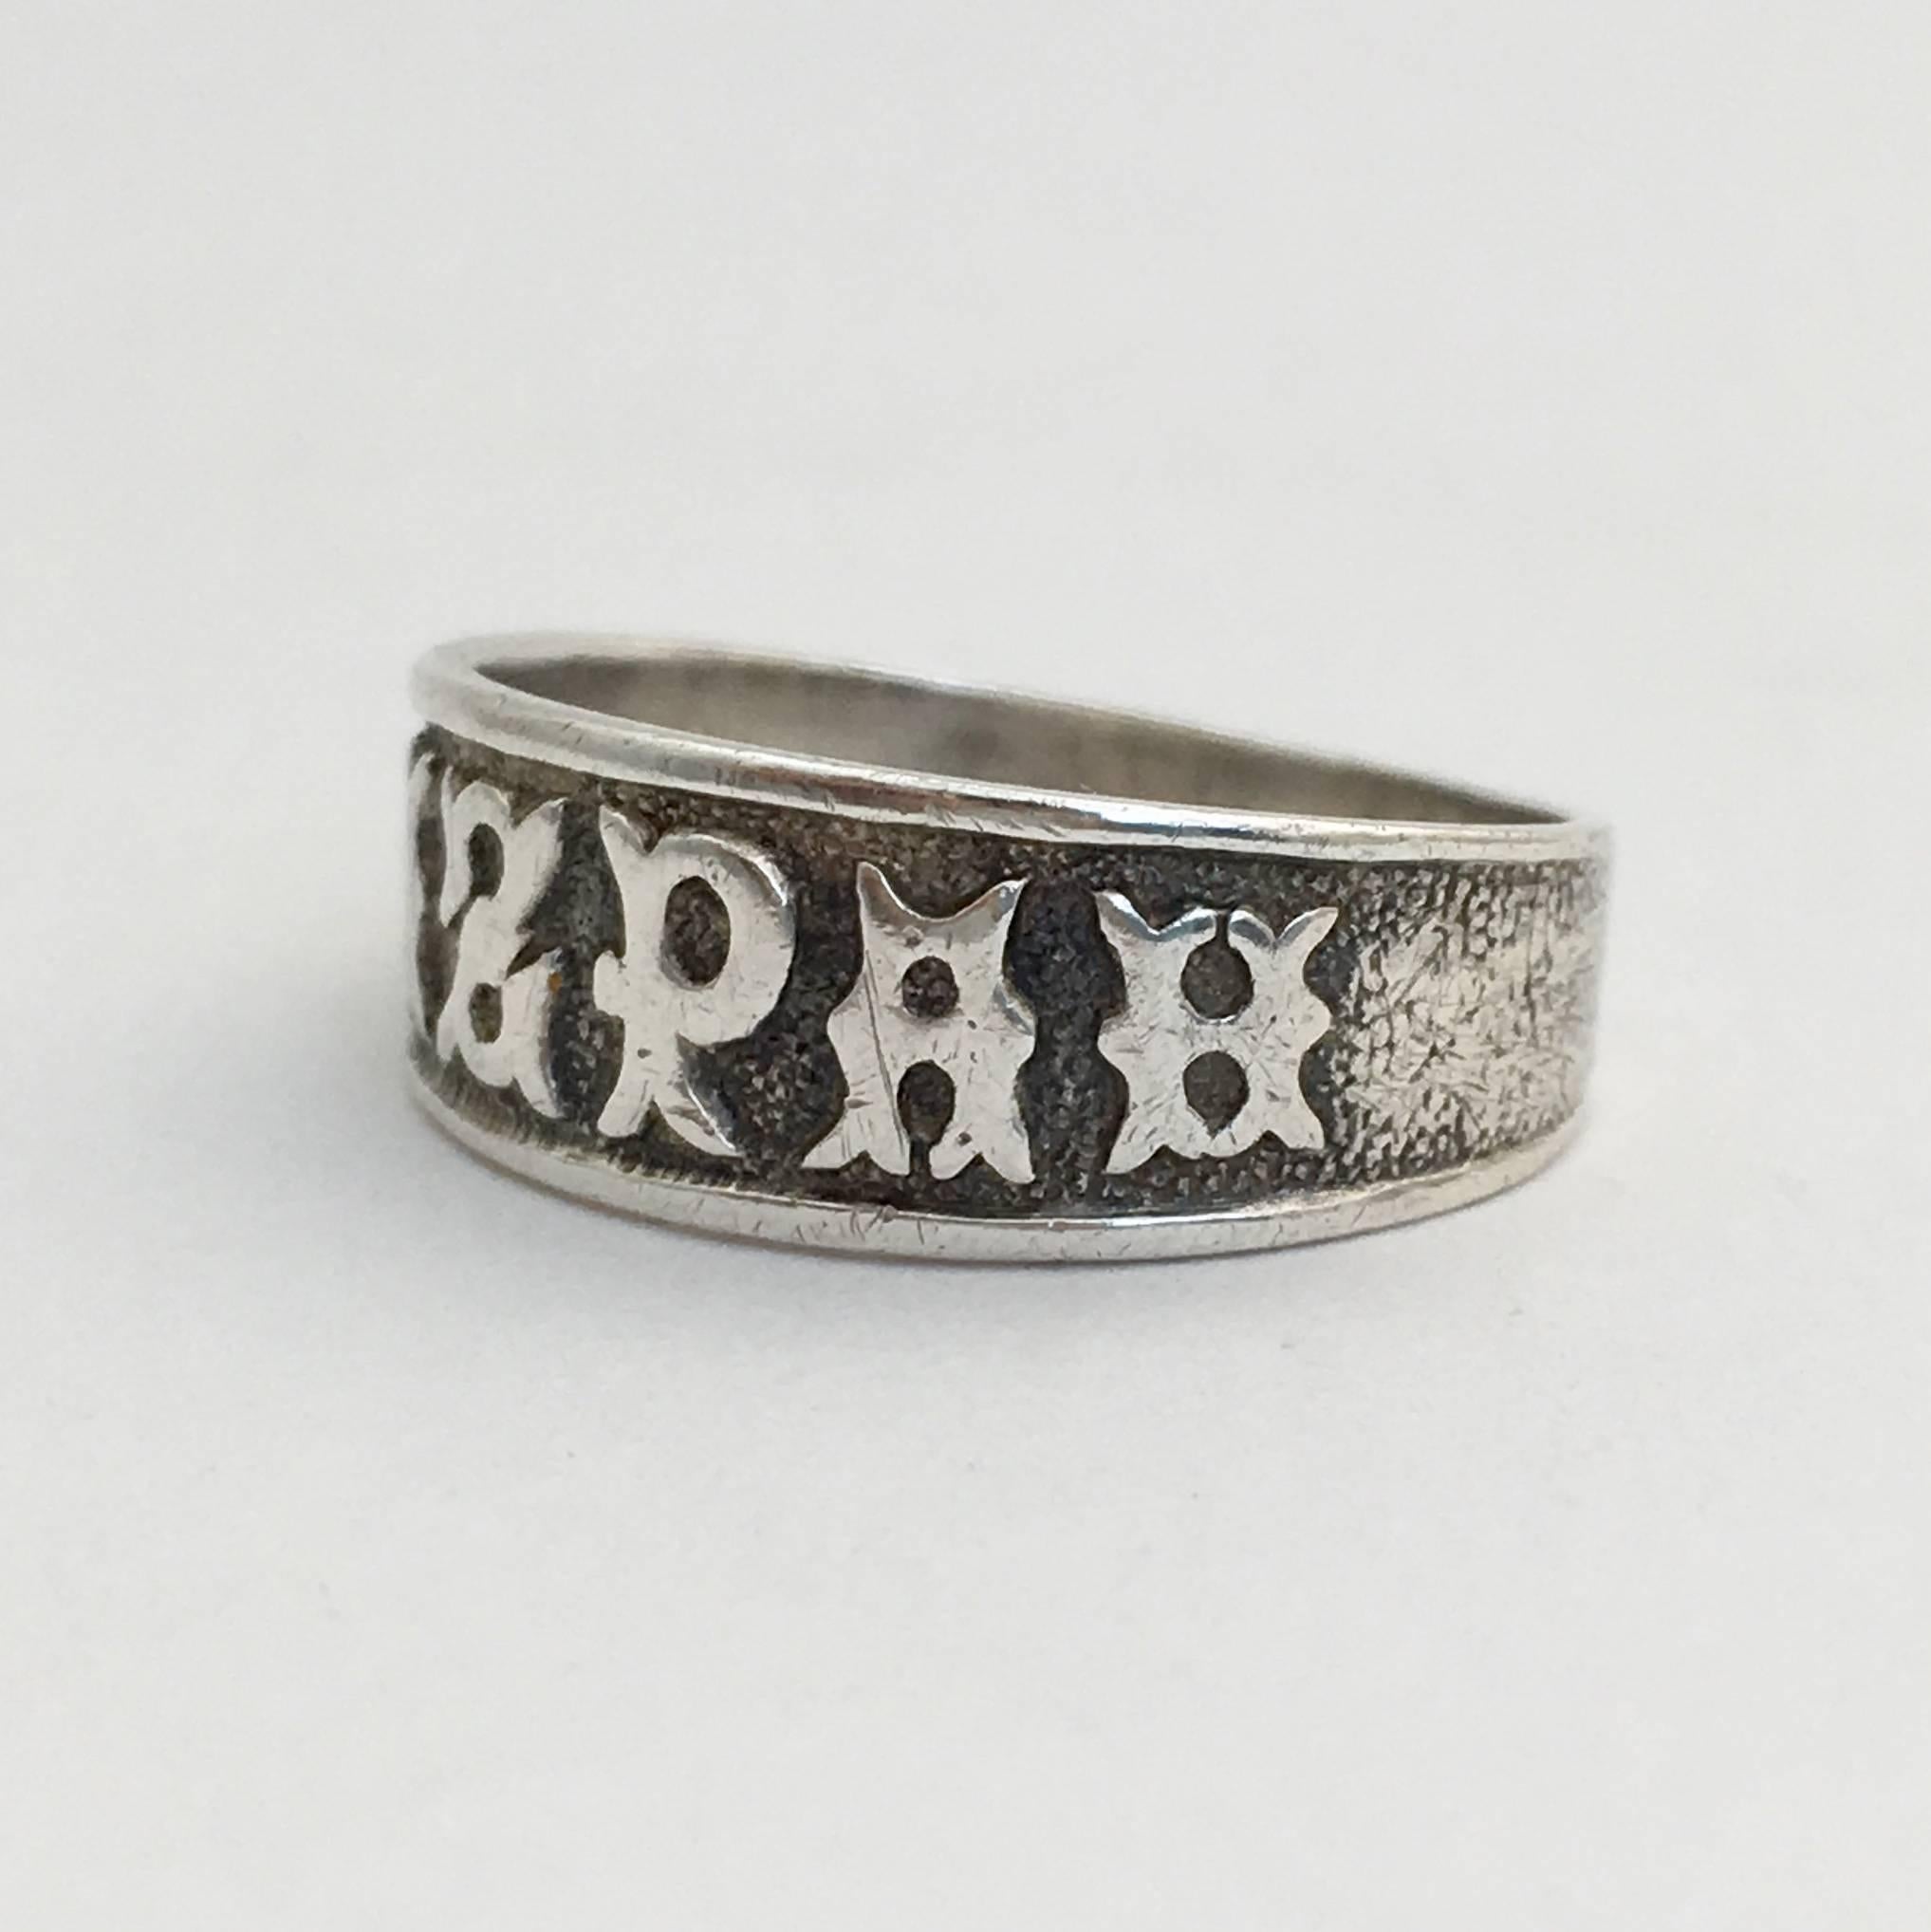 Mizpah is a Hebrew word that denotes an emotional bond between two people. Its use in jewellery became popular during the Victorian era when small silver items would have been given to loved ones as a symbol of love or friendship before a period of